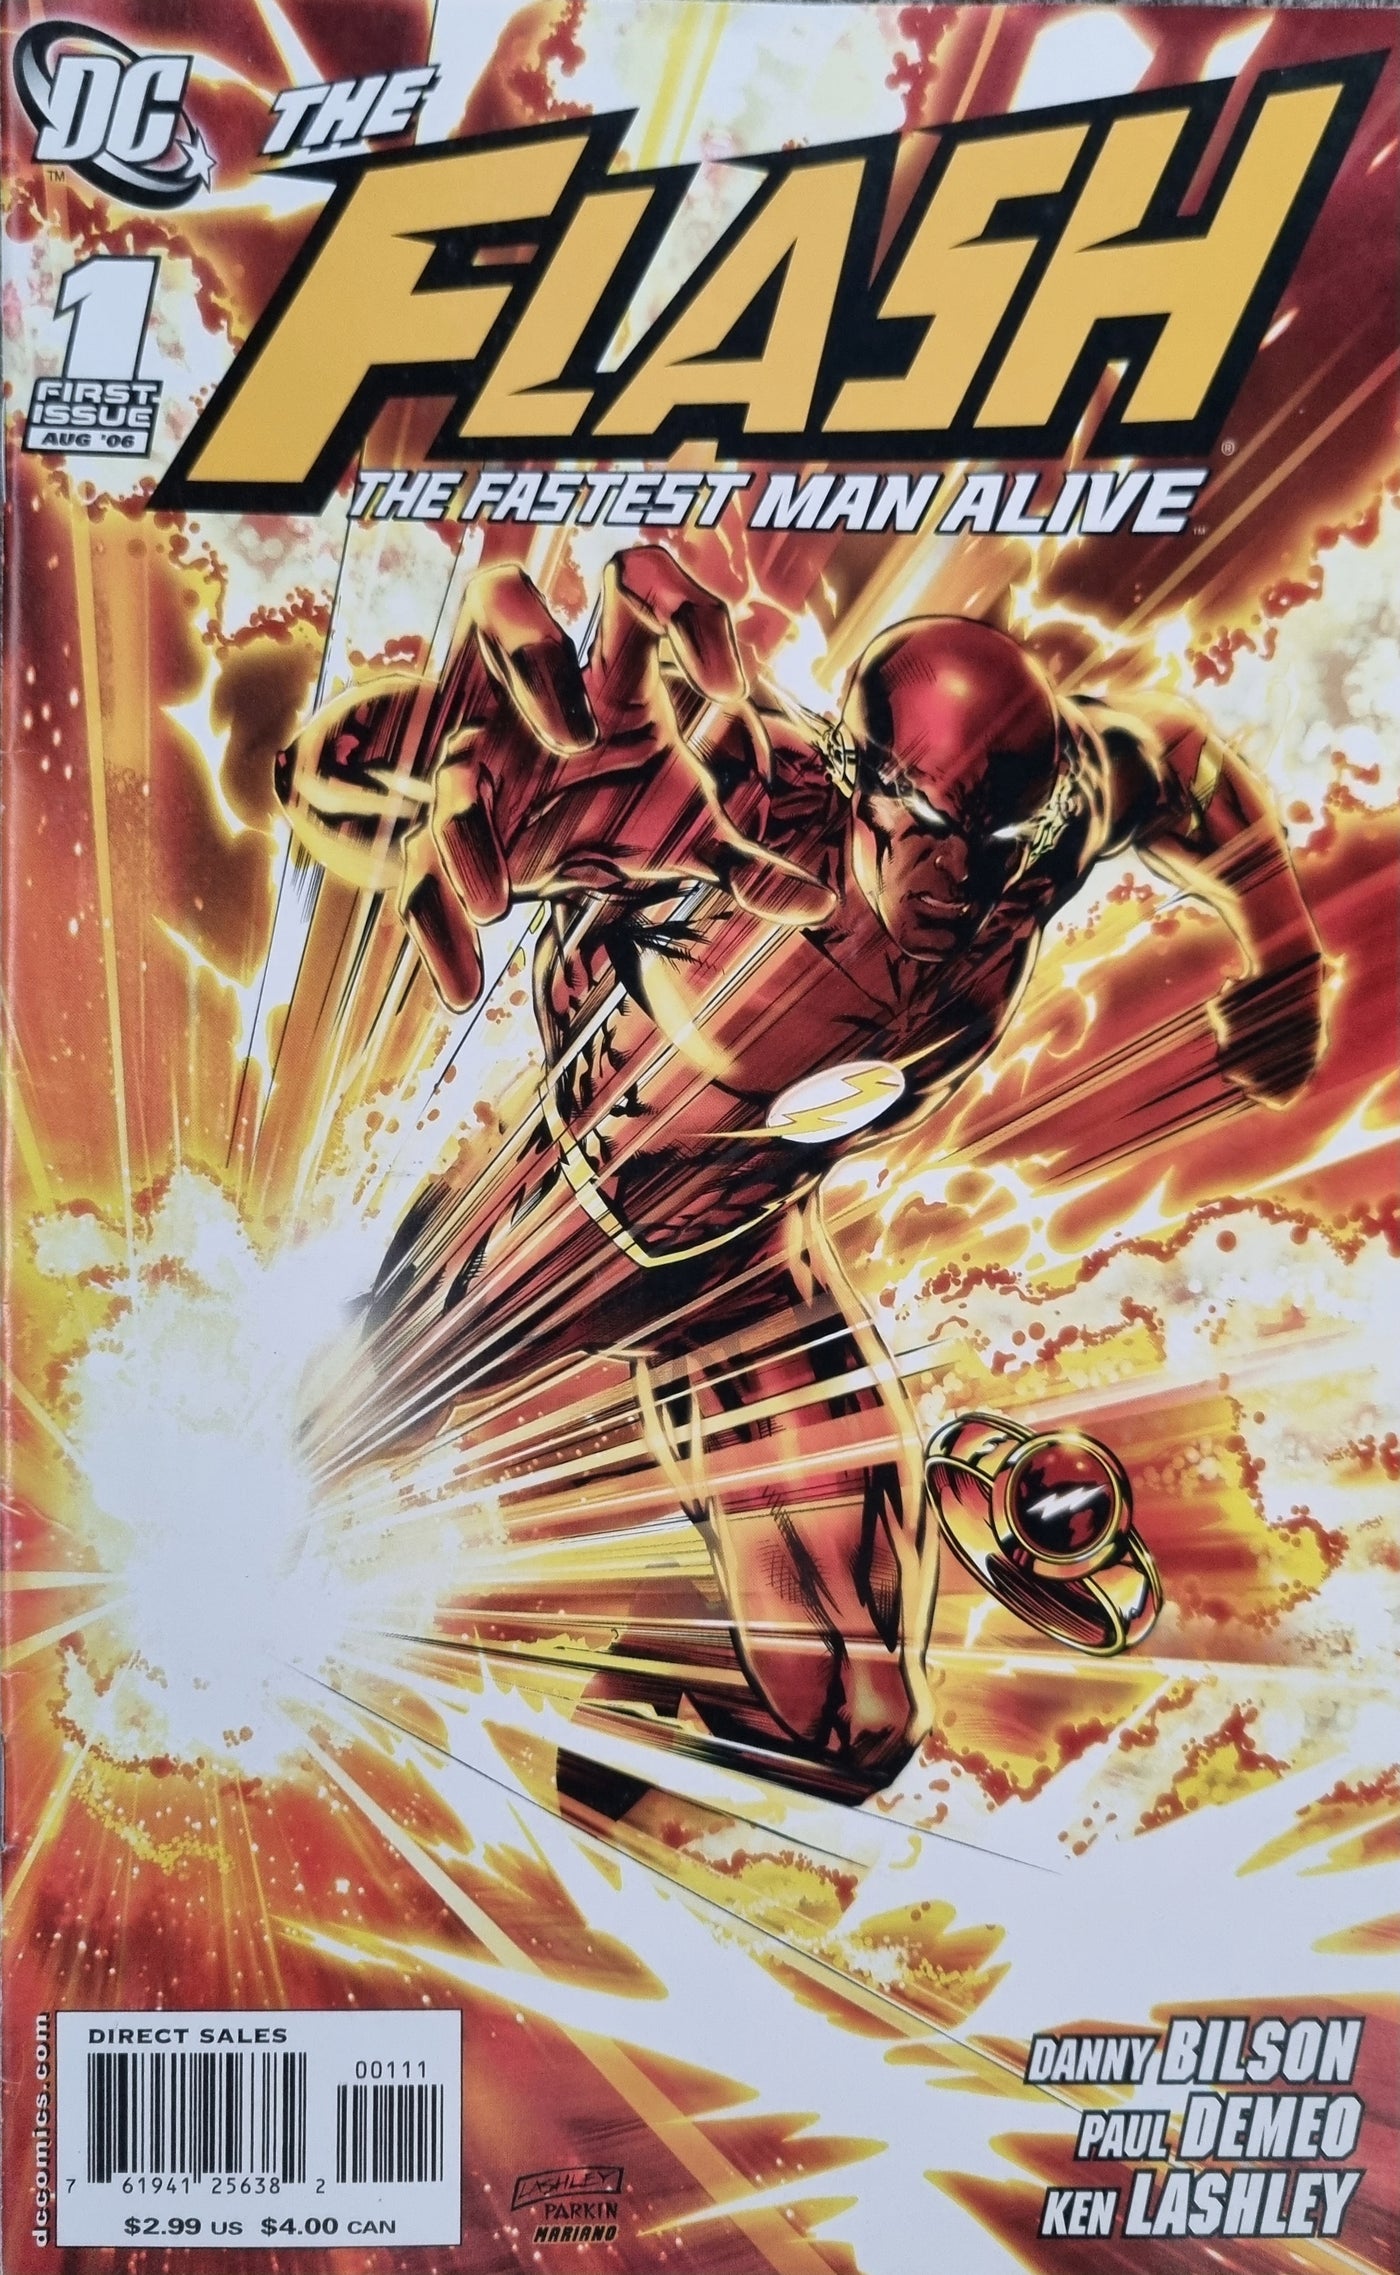 Flash: The Fastest Man Alive #1 (August '06)